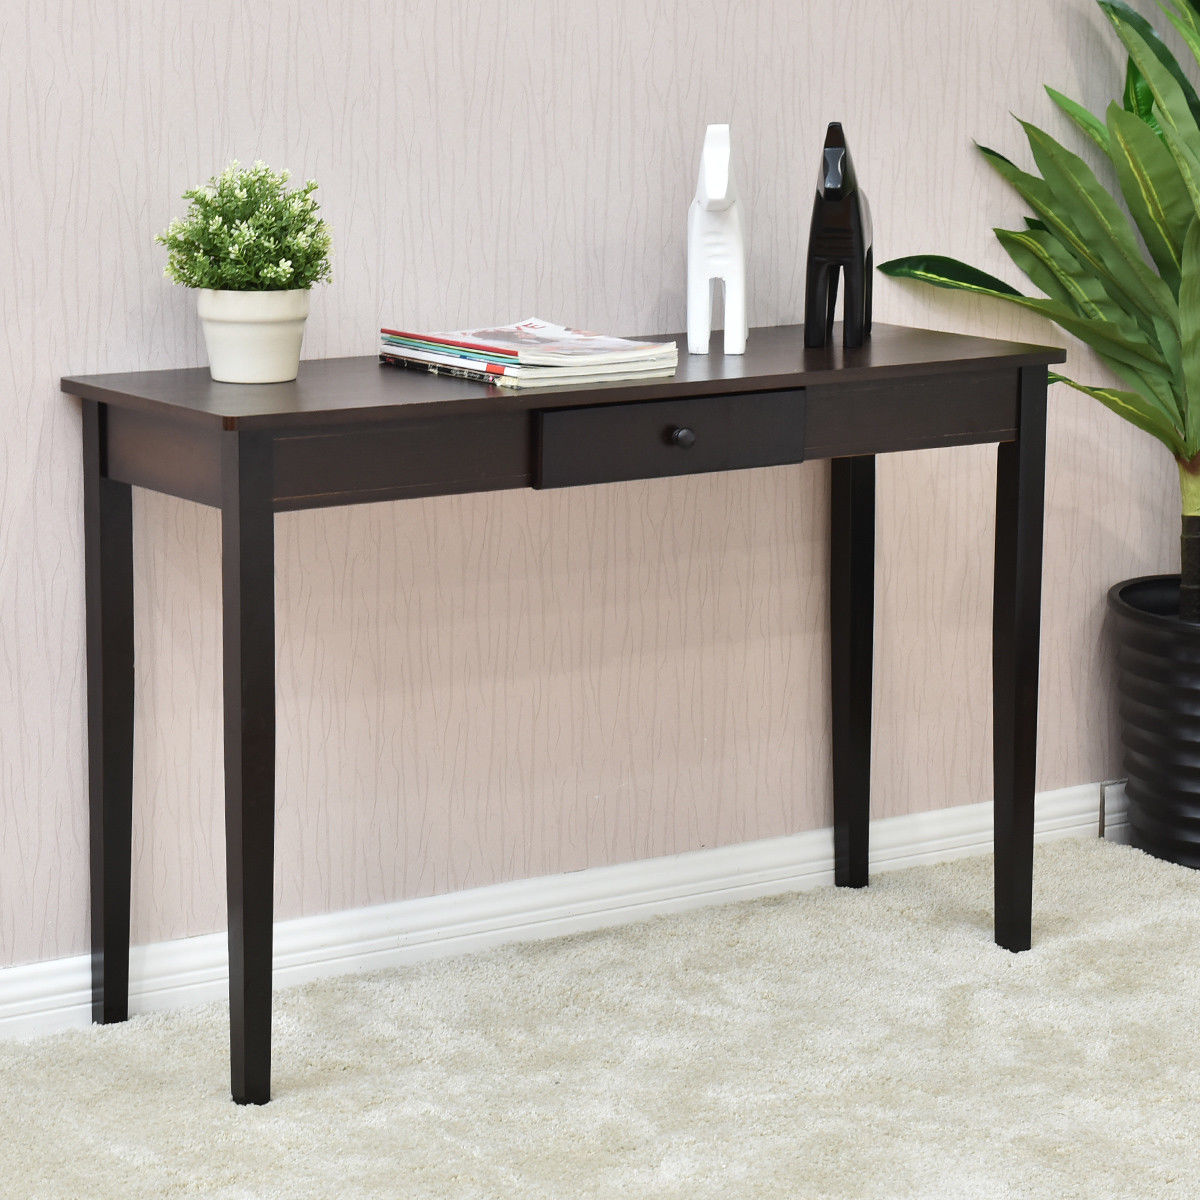 giantex console table entry hallway desk entryway side sofa accent with drawer modern wood living room furniture outdoor storage seat pier one dining aluminium door threshold